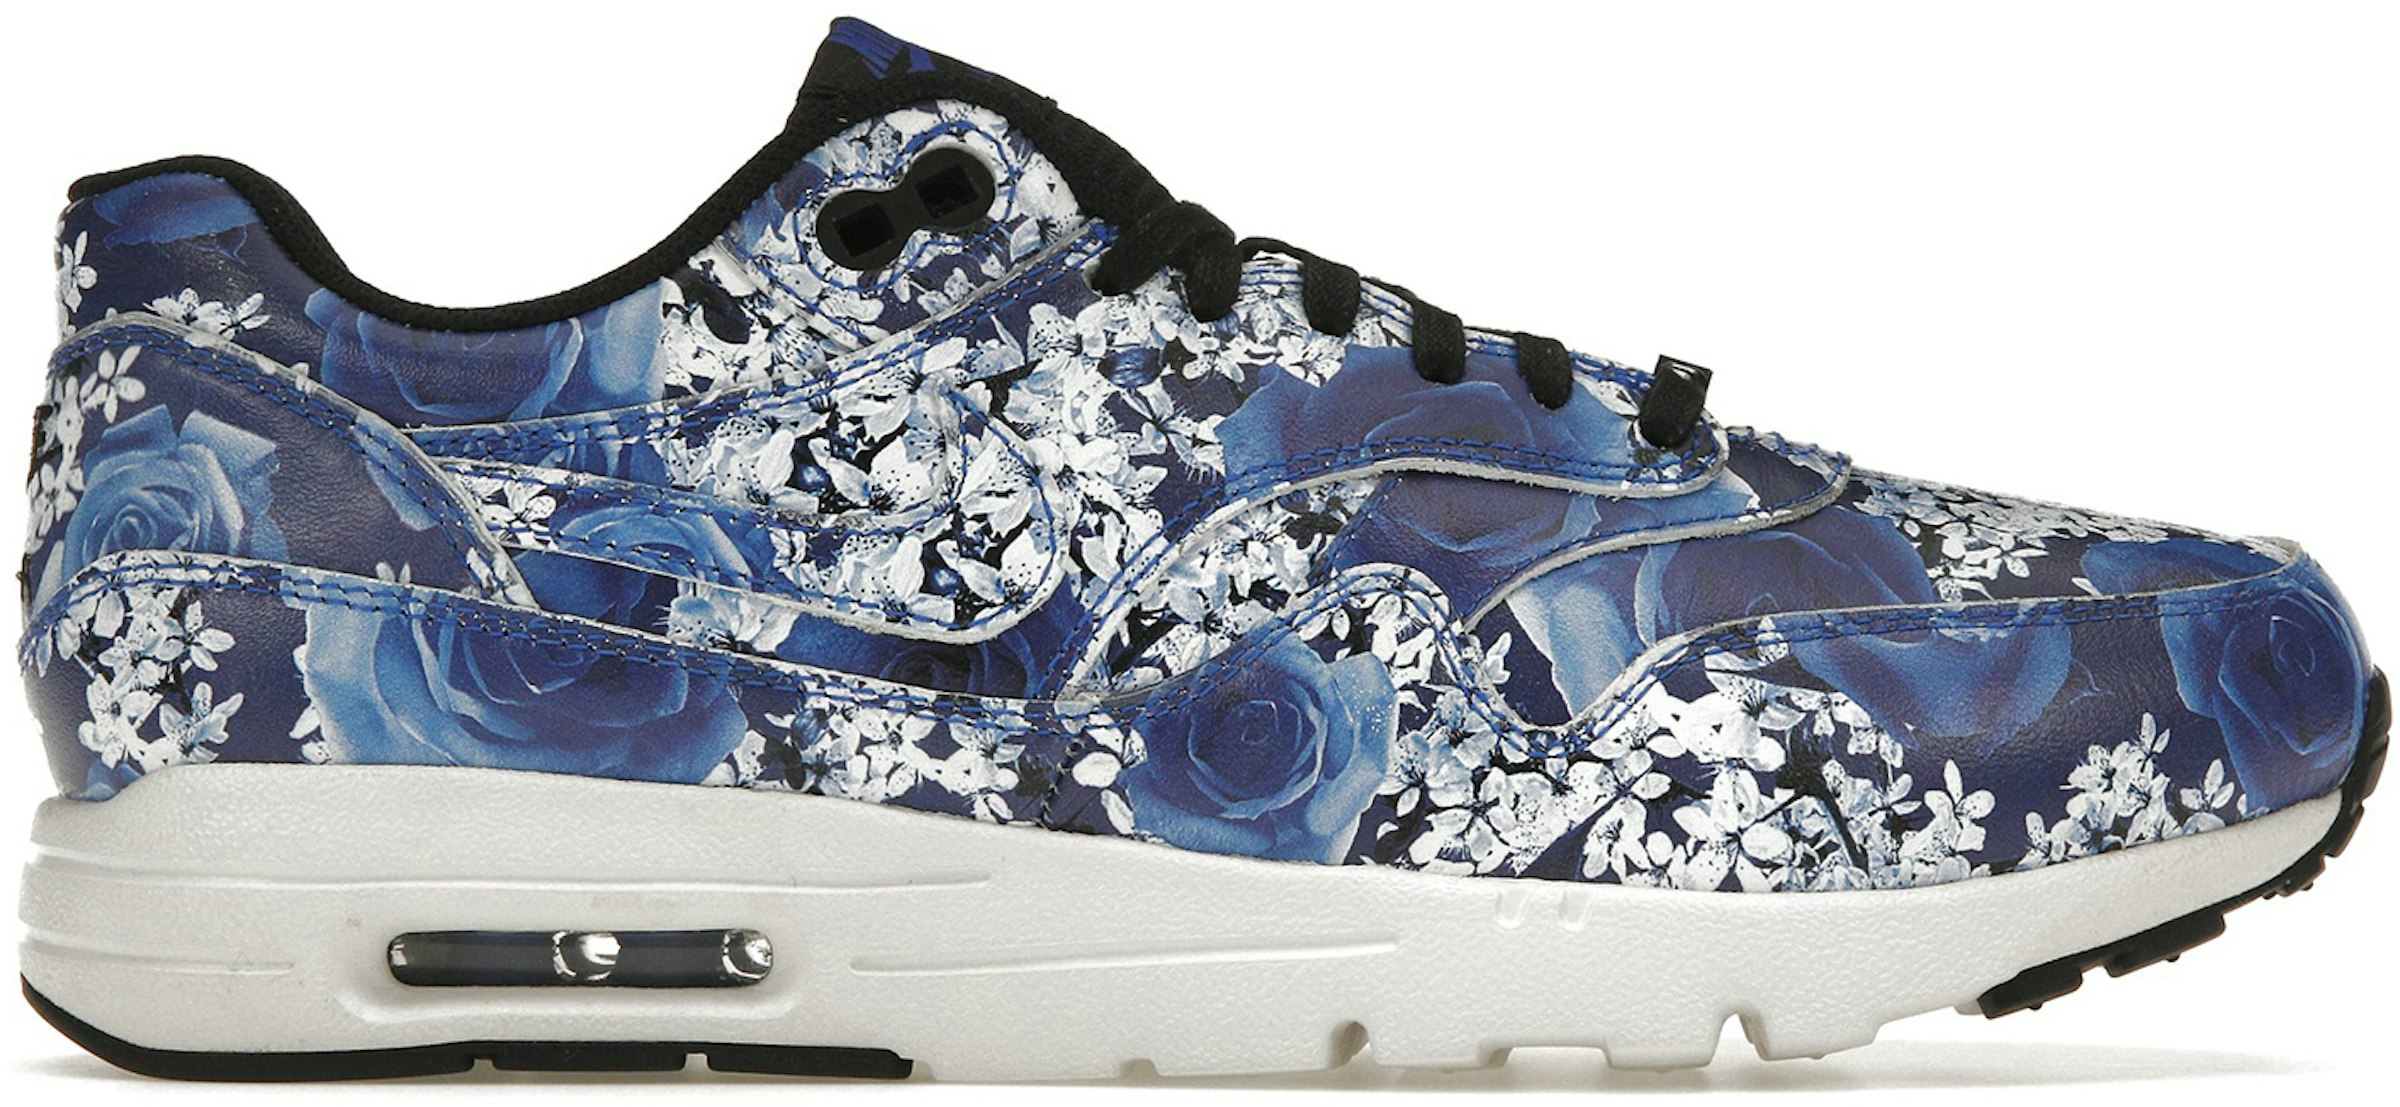 Nike Max 1 City Collection (Women's) - 747105-401 - US